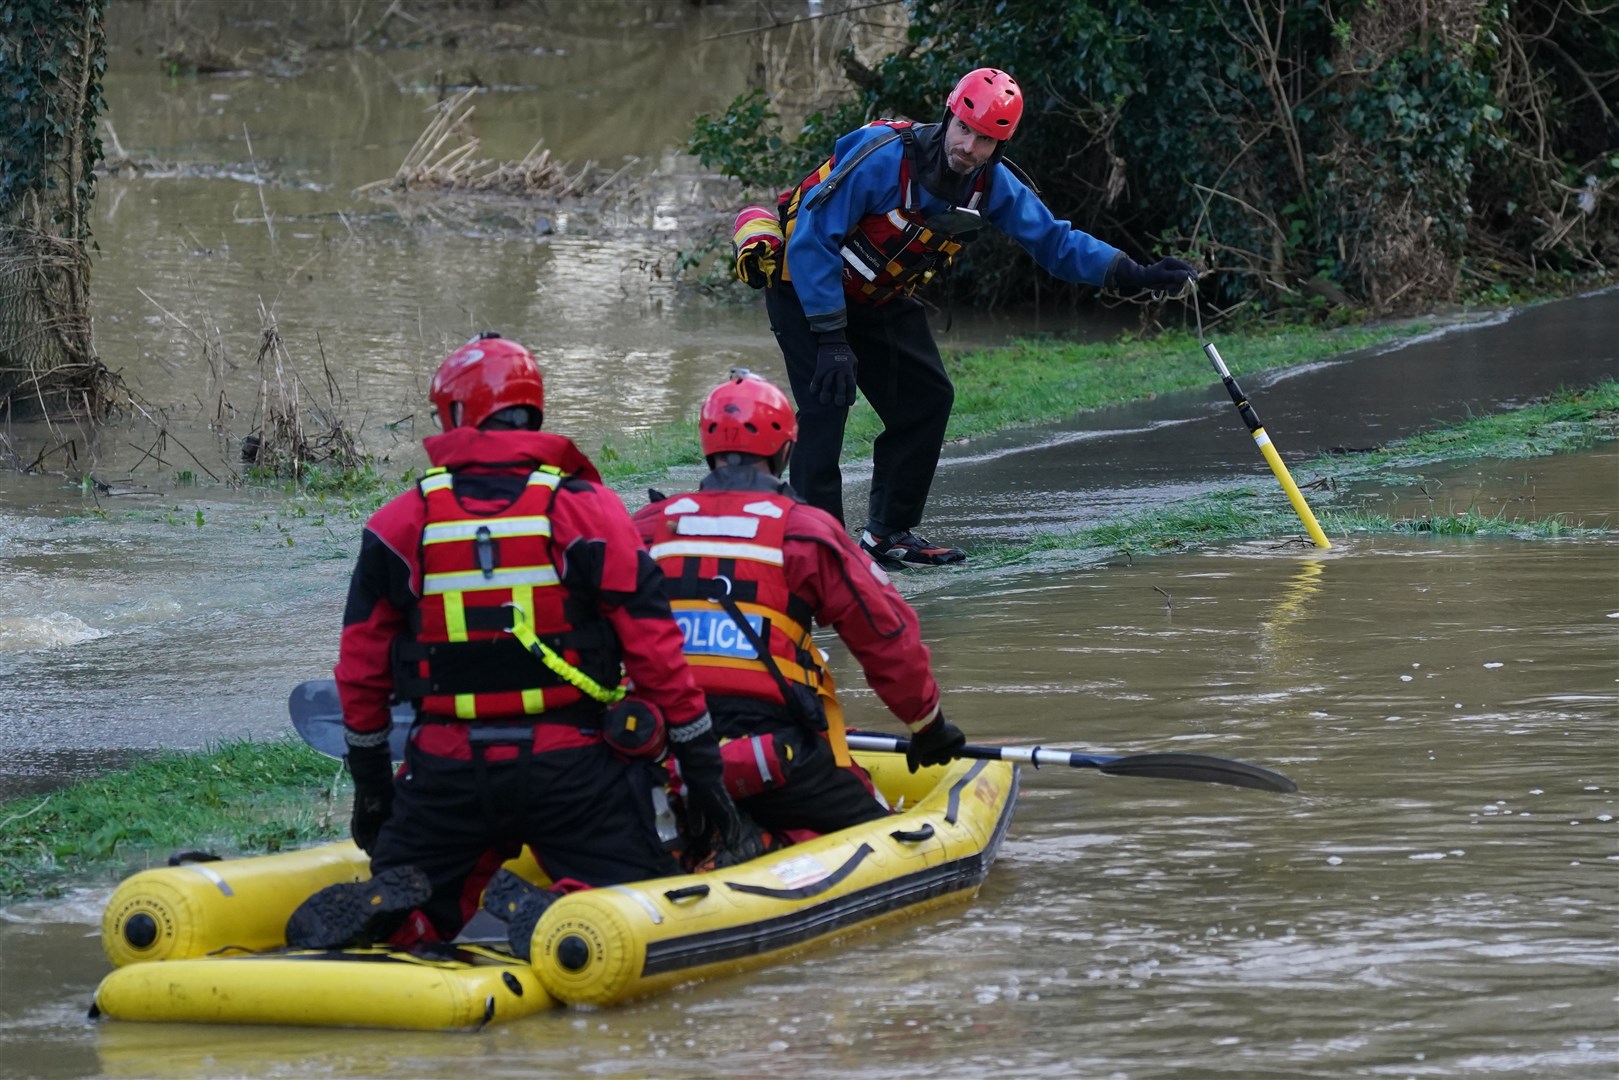 Specialist dive teams are assisting with the search (Jacob King/PA)